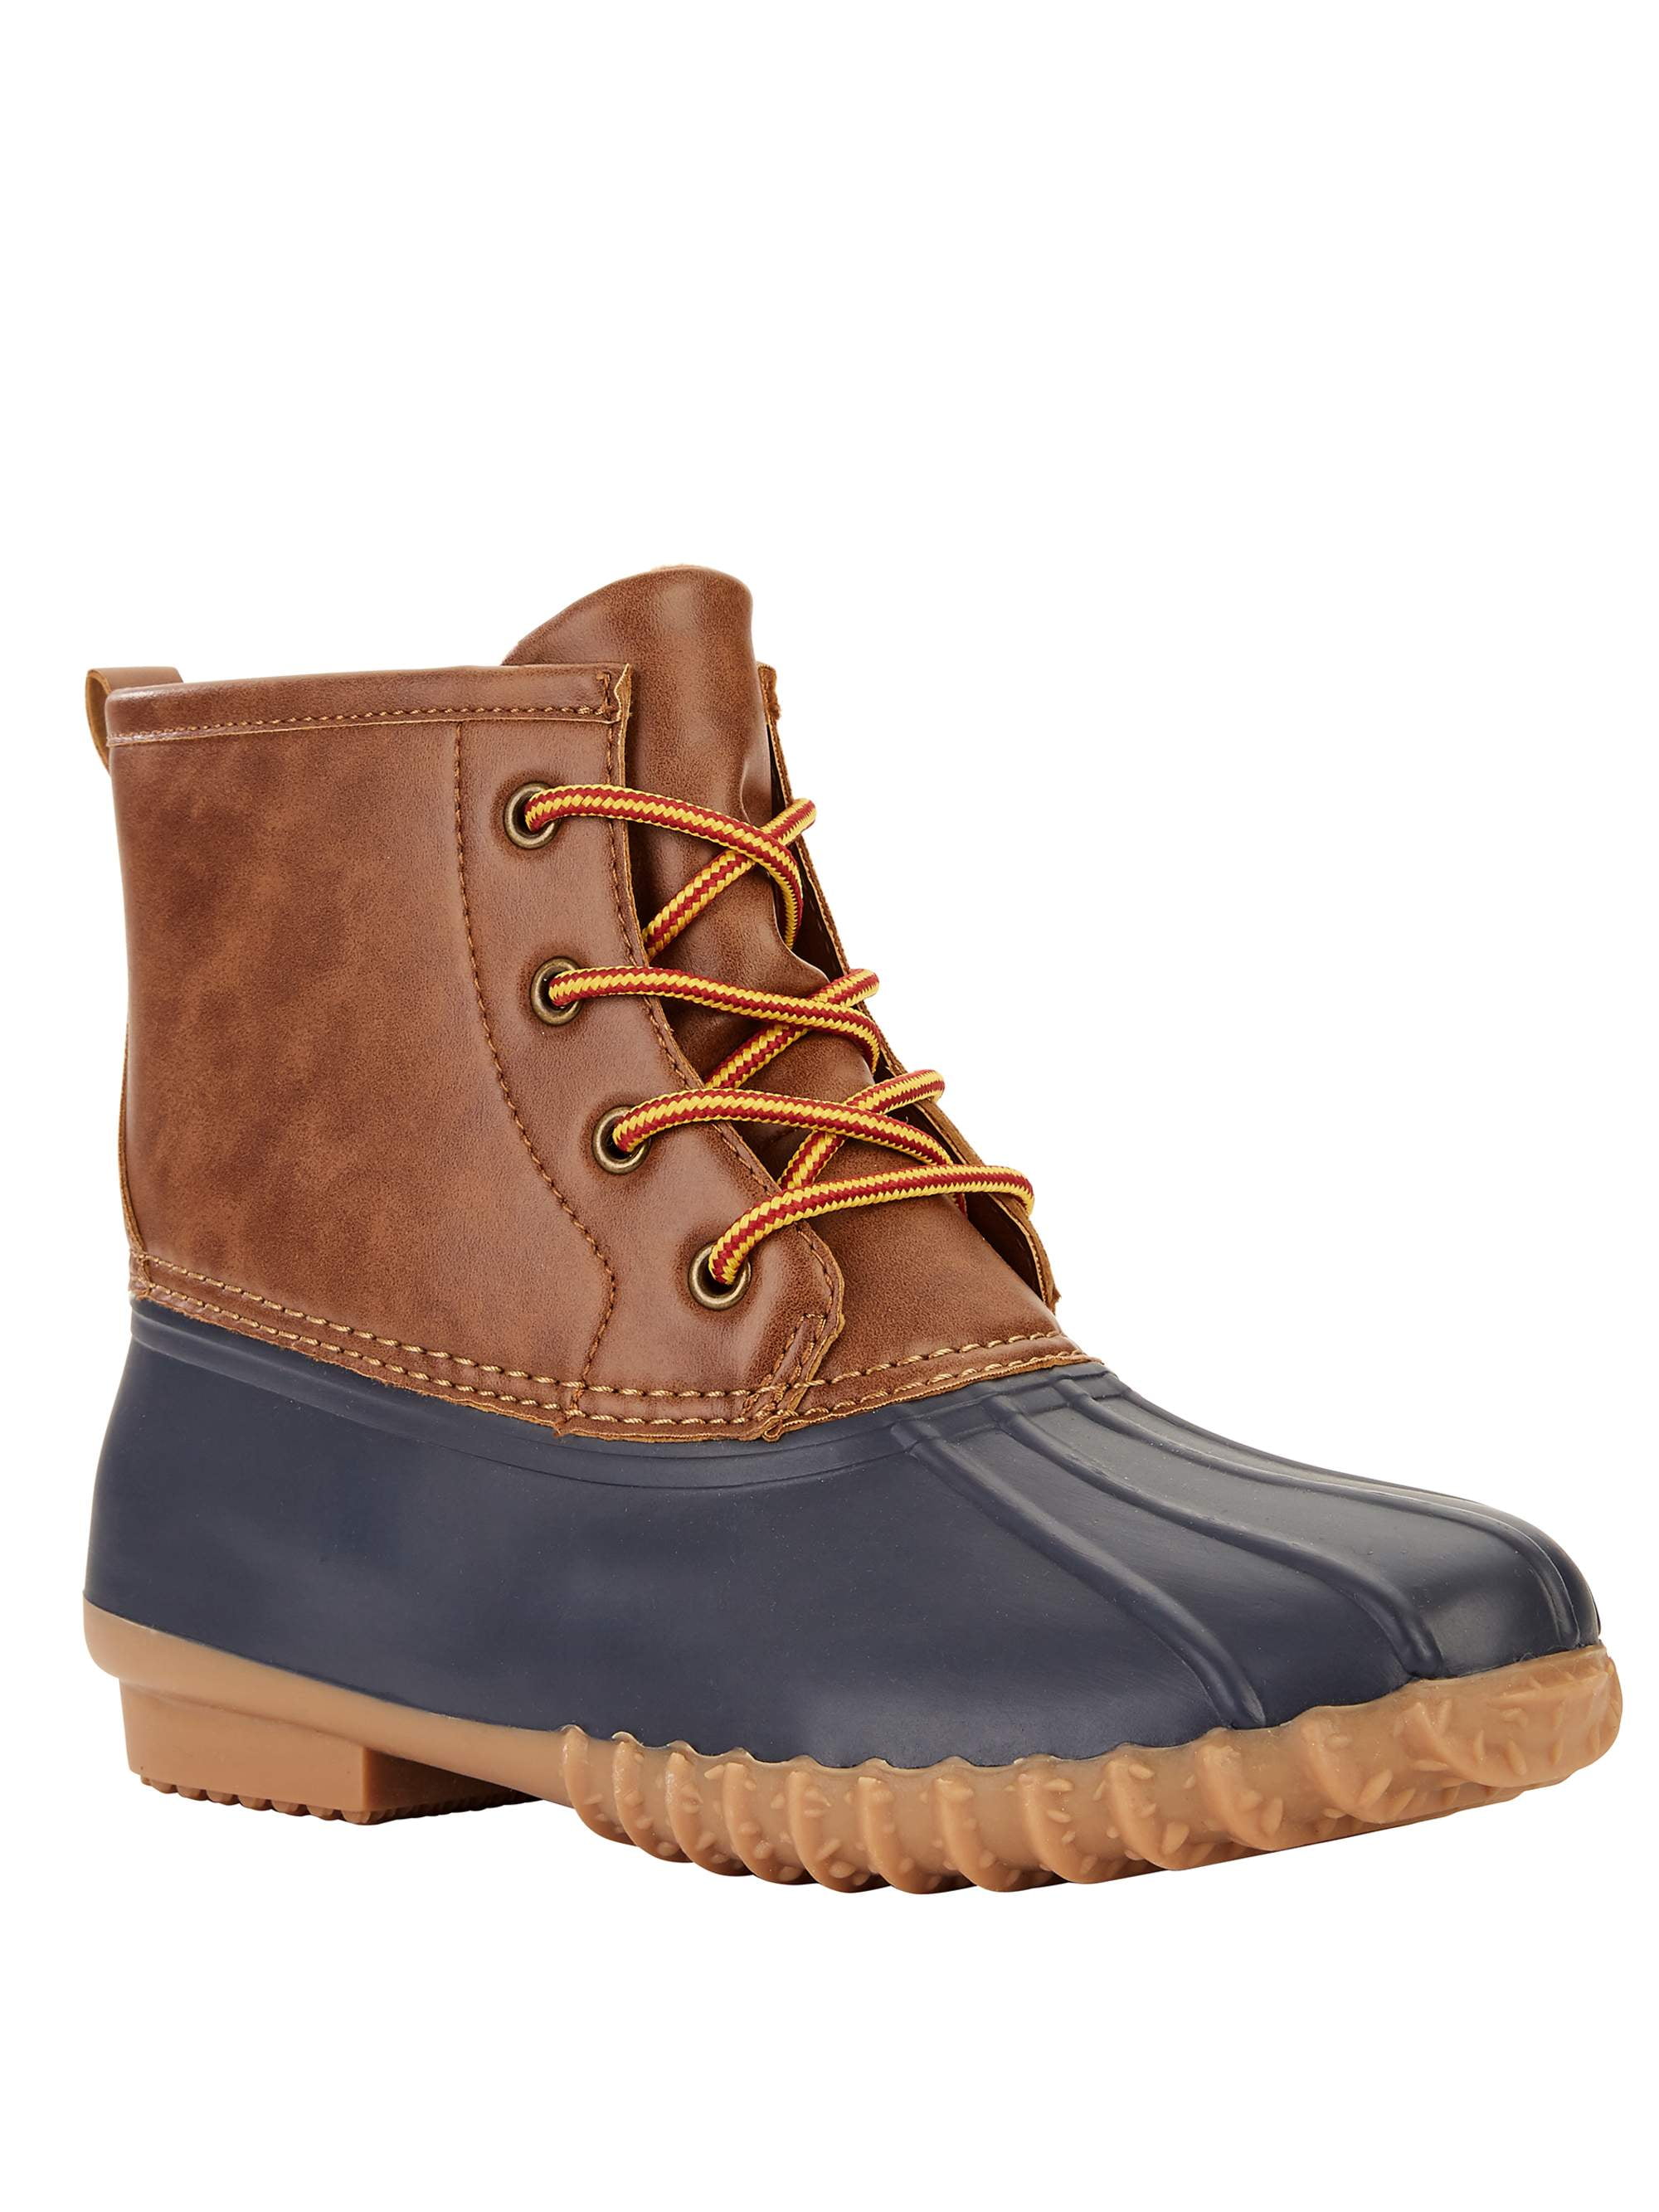 portland boot company duck duck boot low